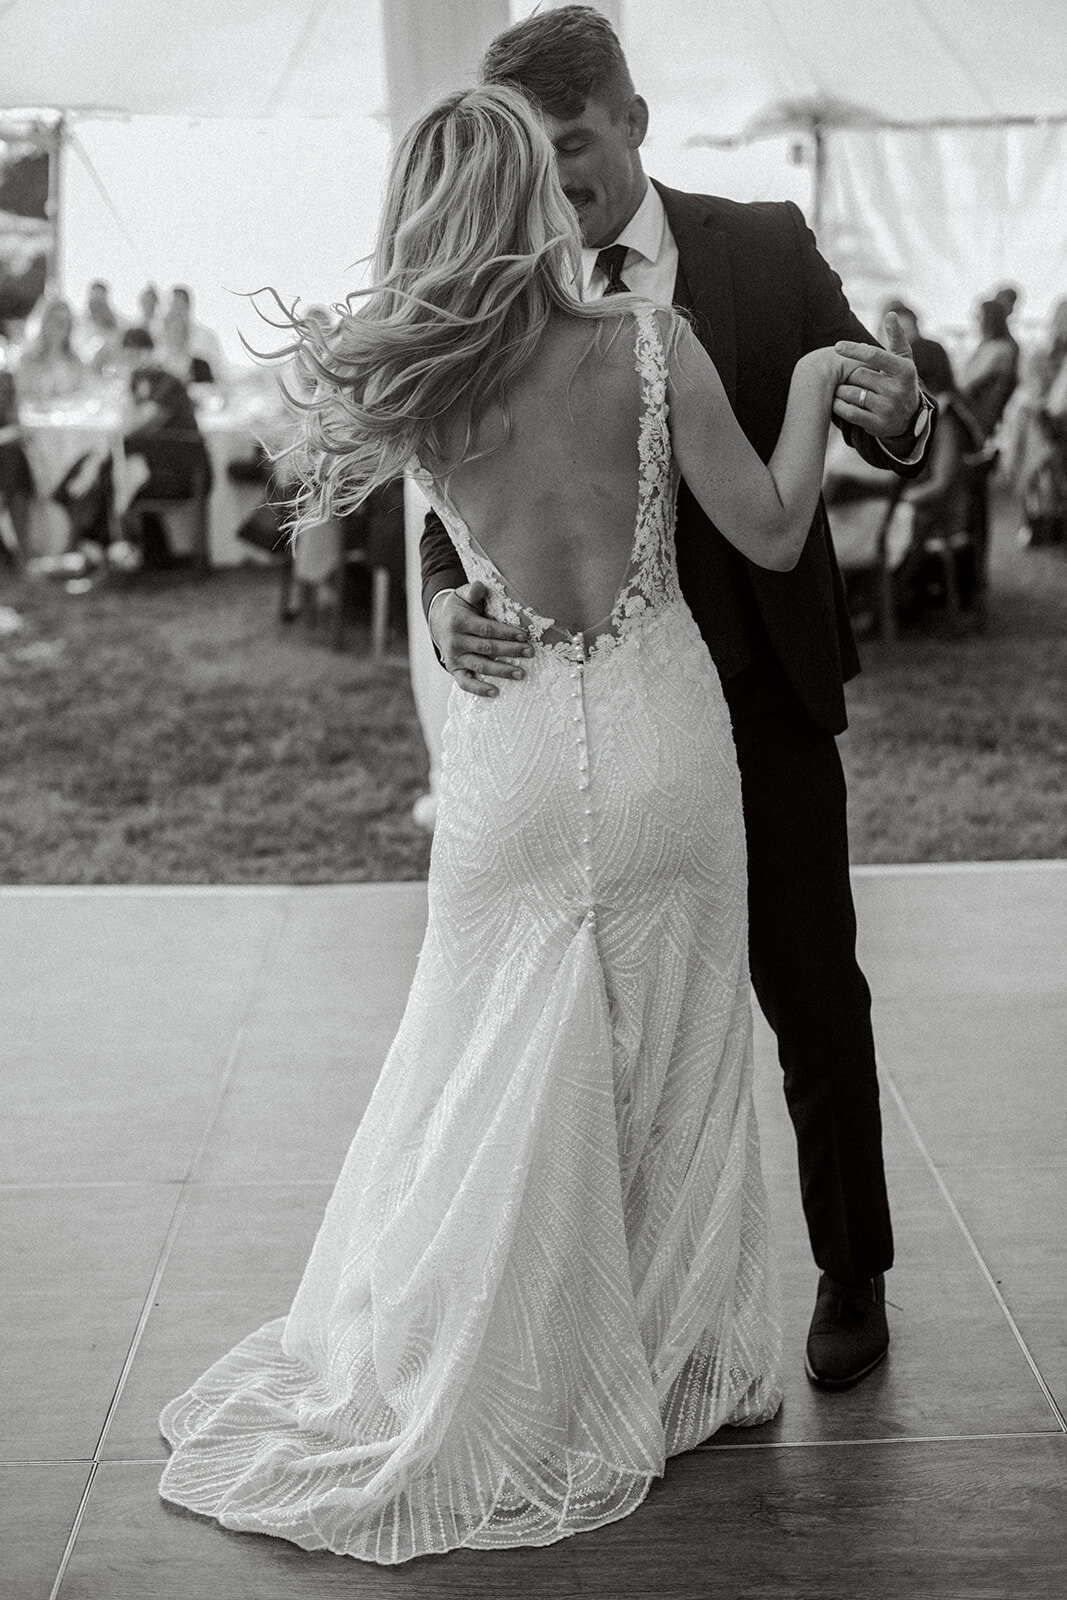 Bride and grooms first dance at Dolphin Bay Resort in Pismo Beach, CA